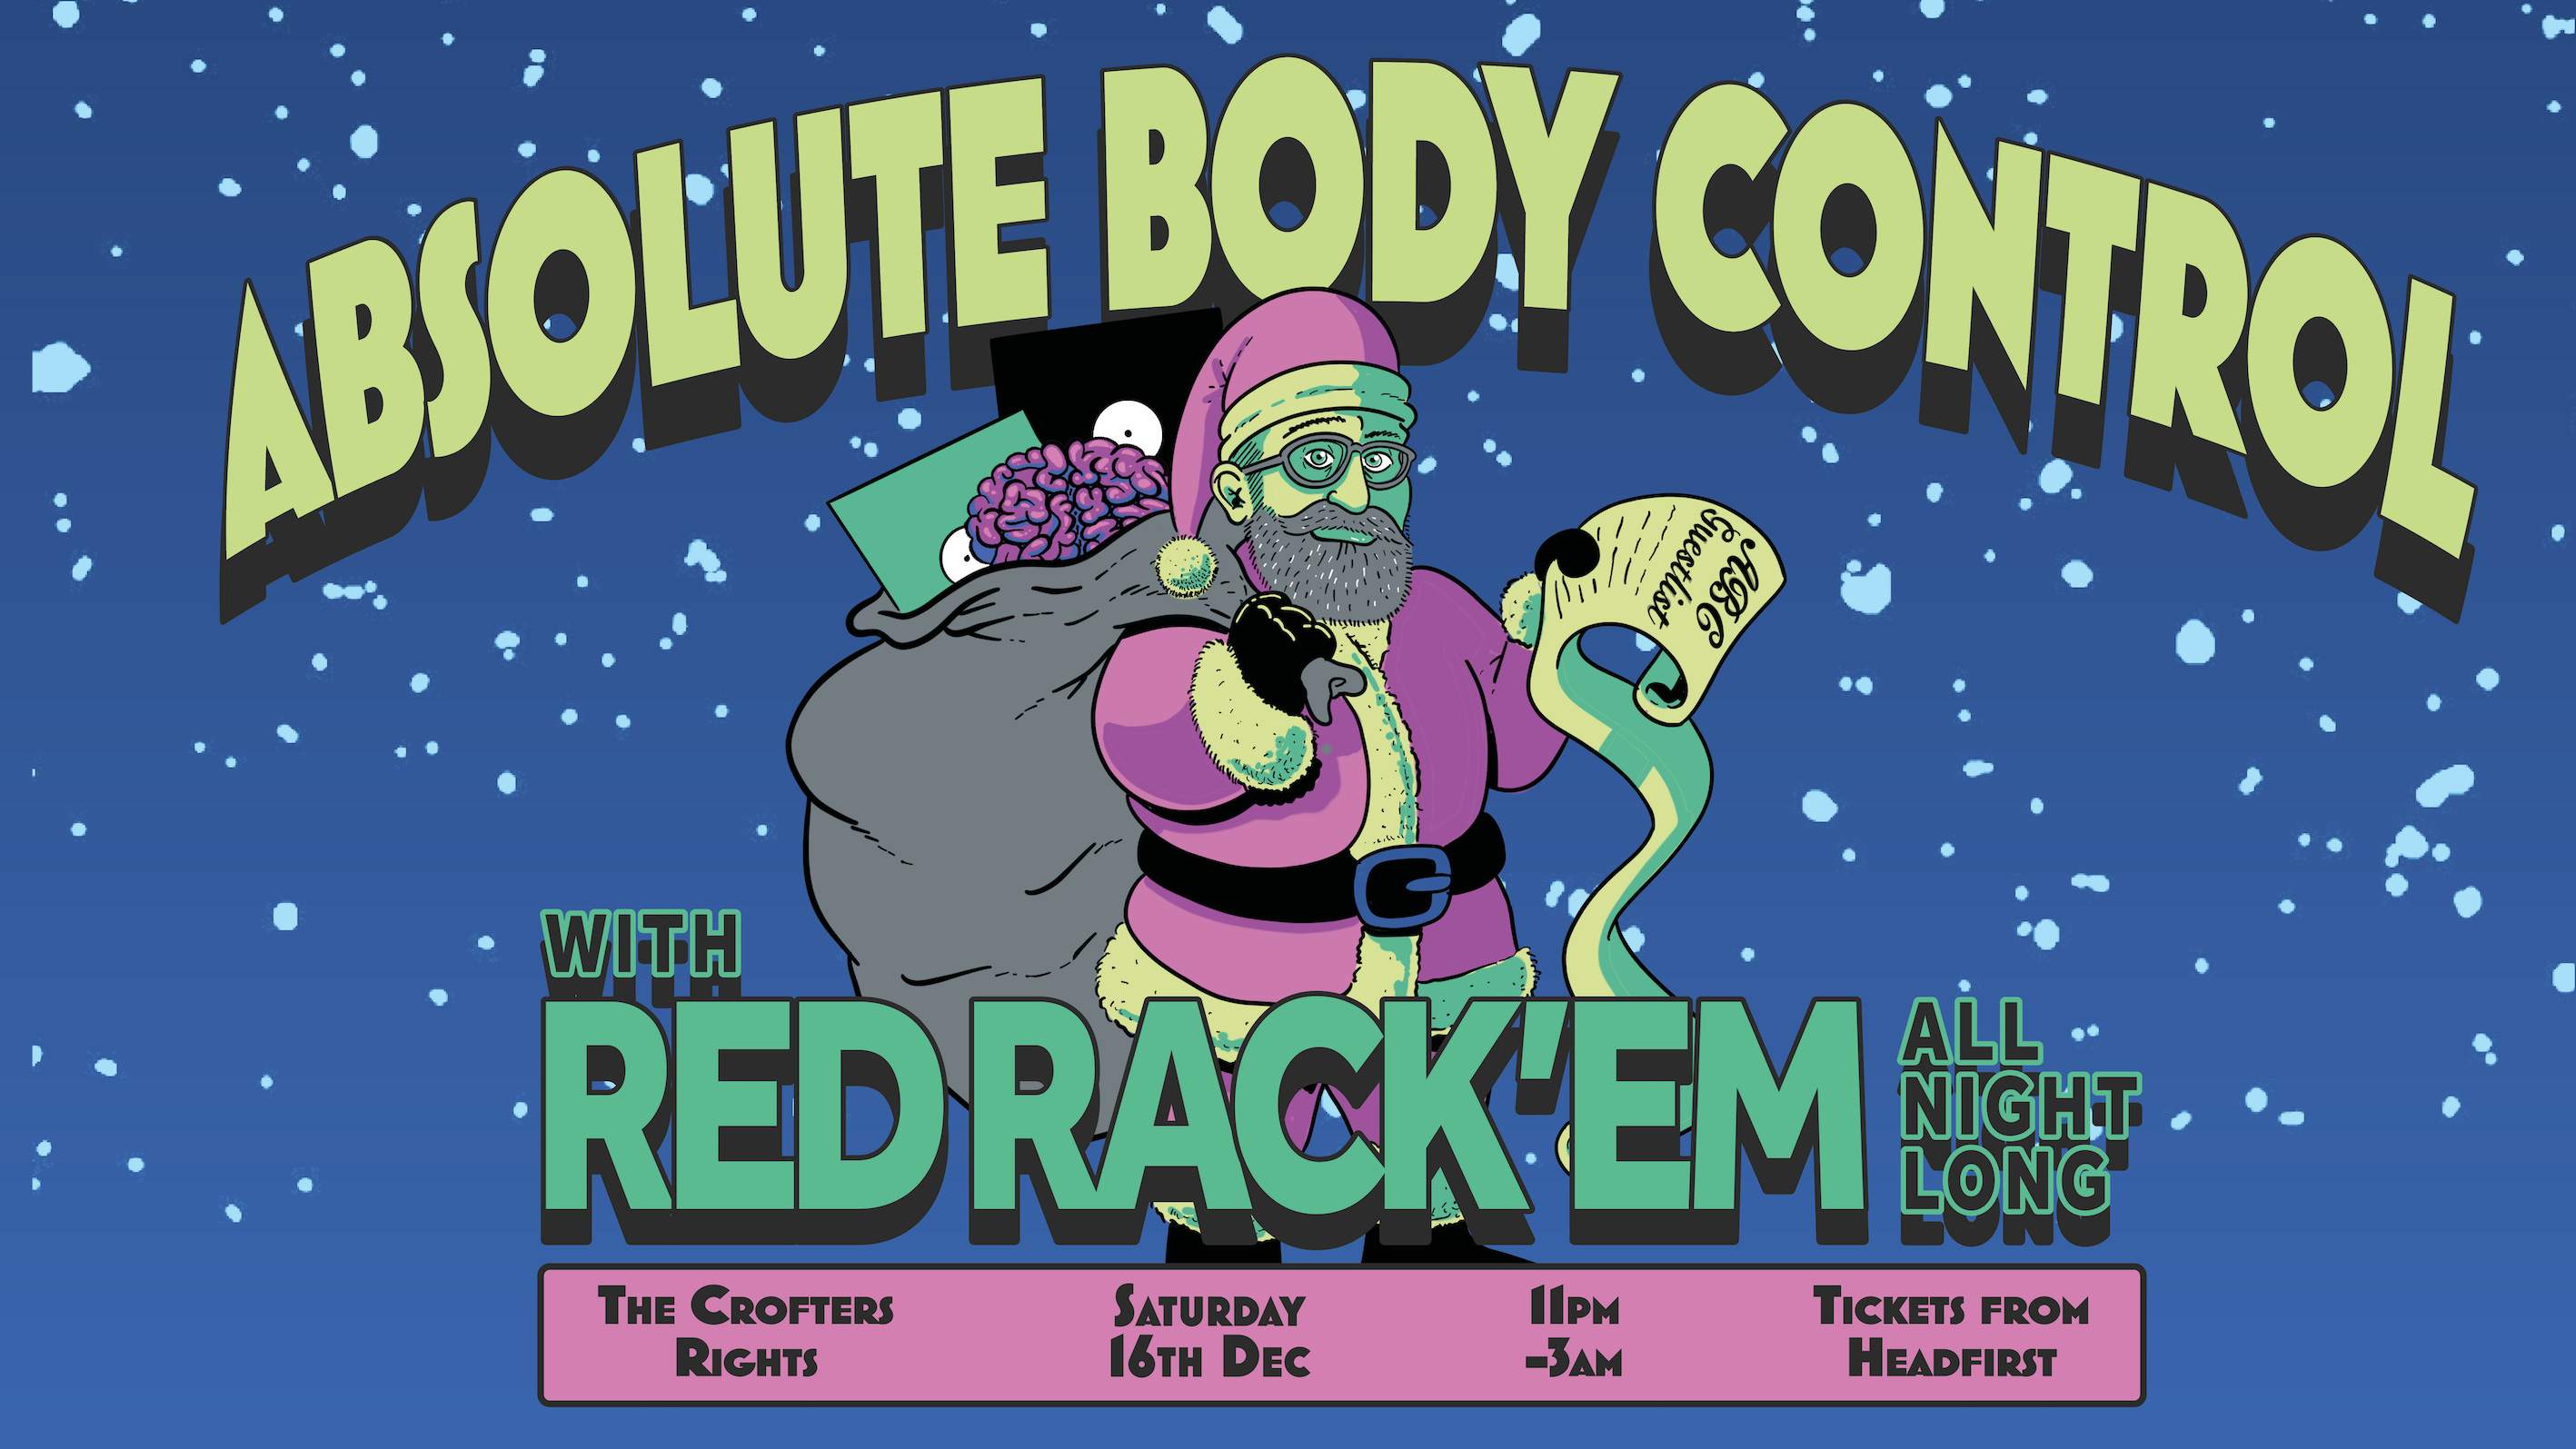 Absolute Body Control: Red Rack'em - フライヤー表